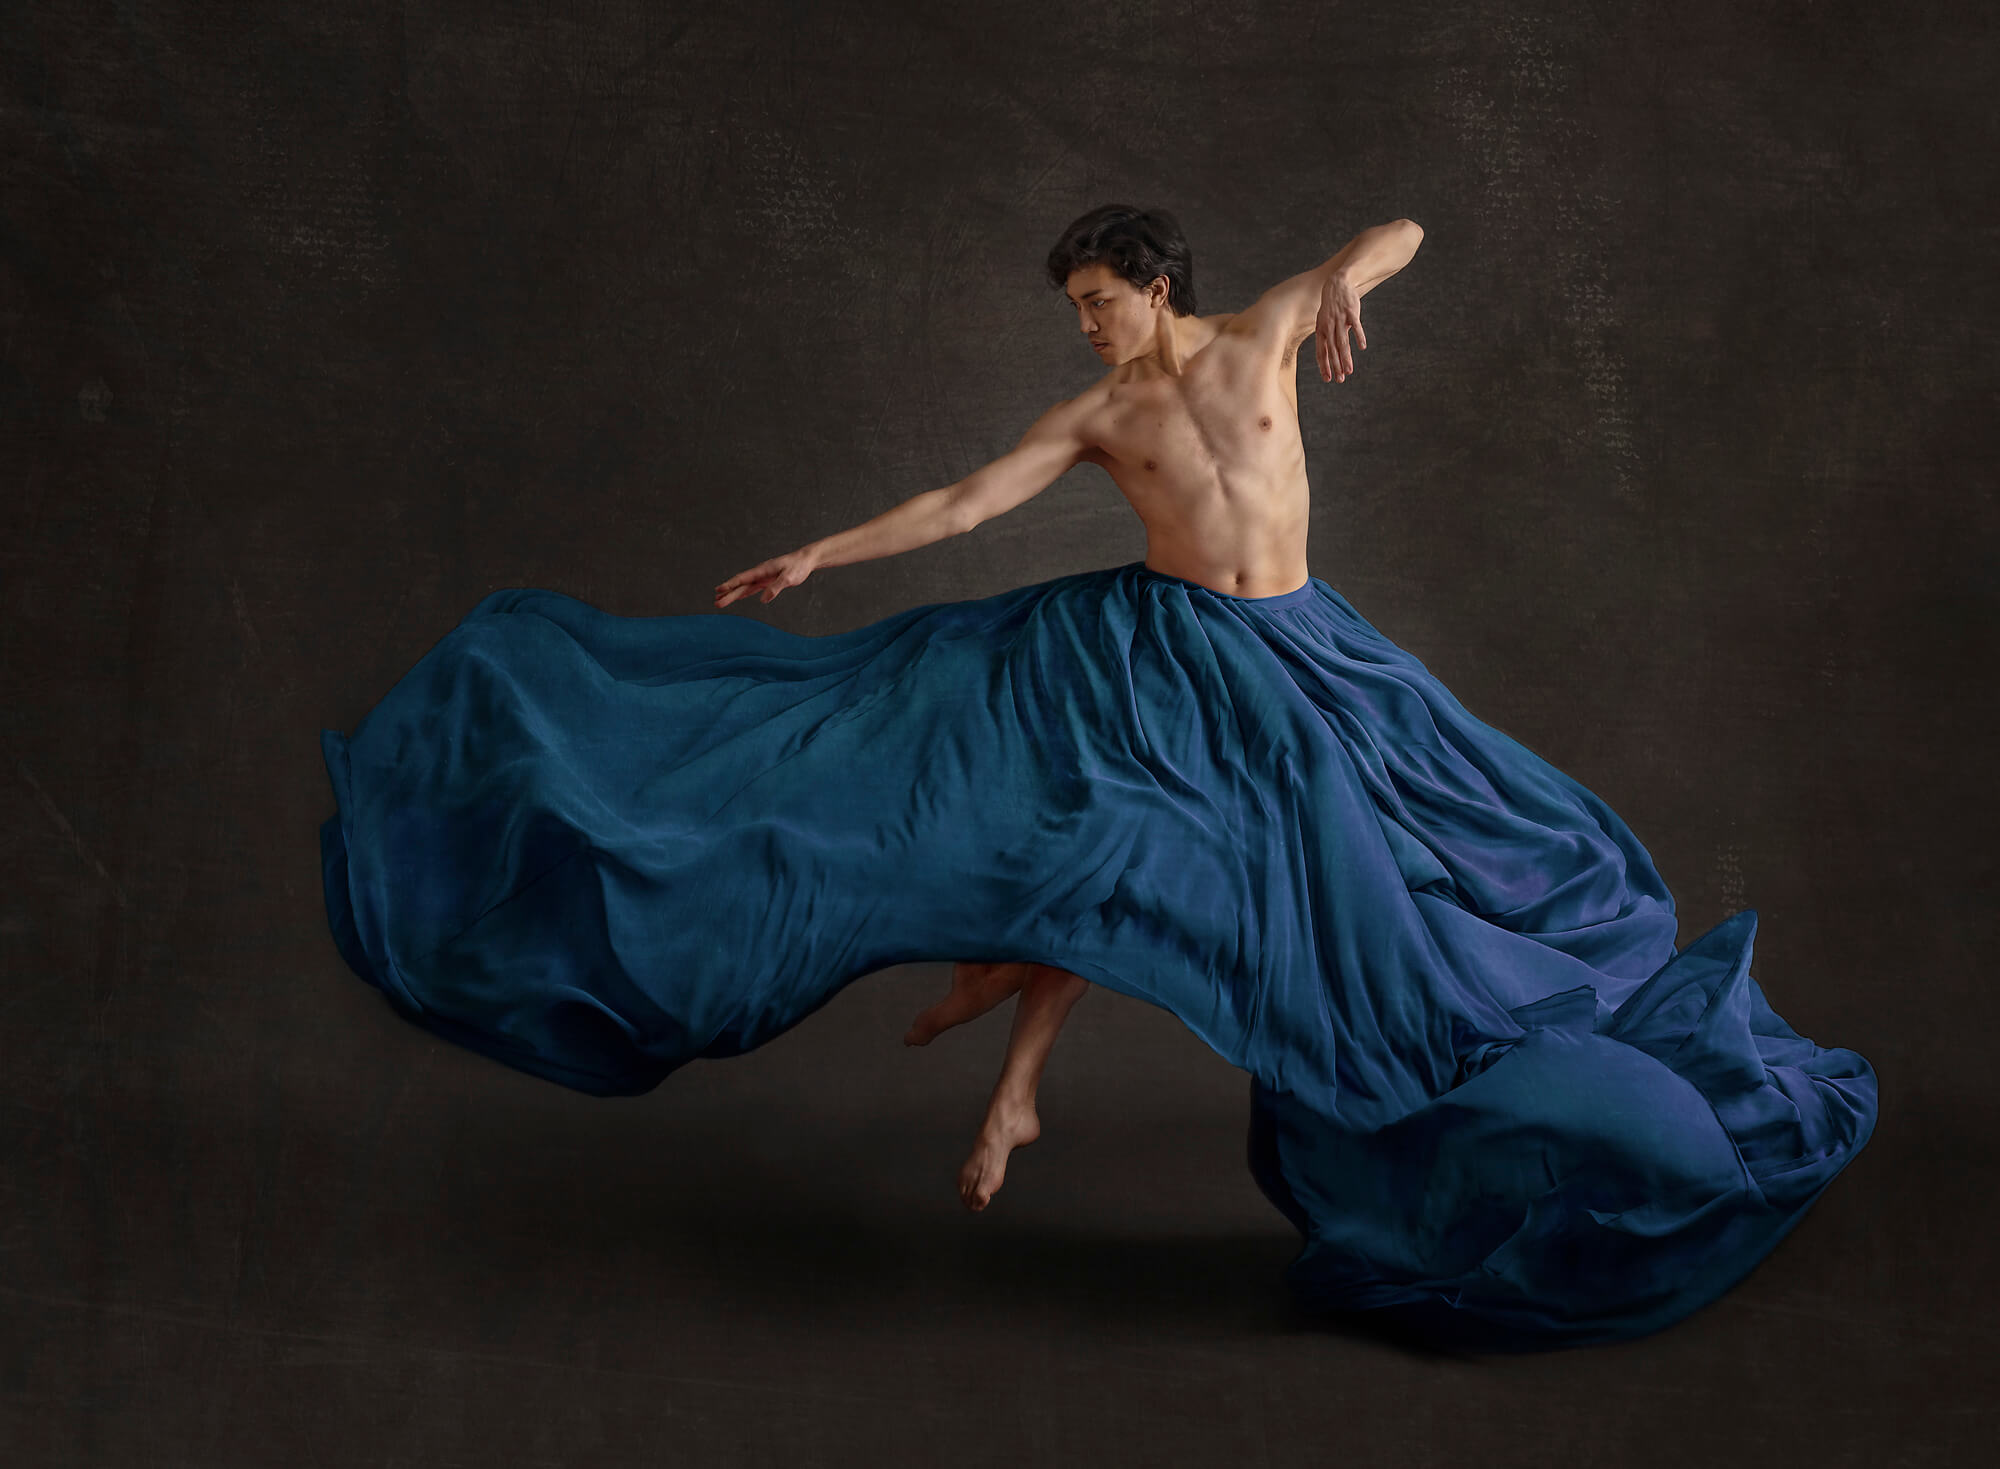 Male dancer jumping in a blue skirt in L.A. photography studio